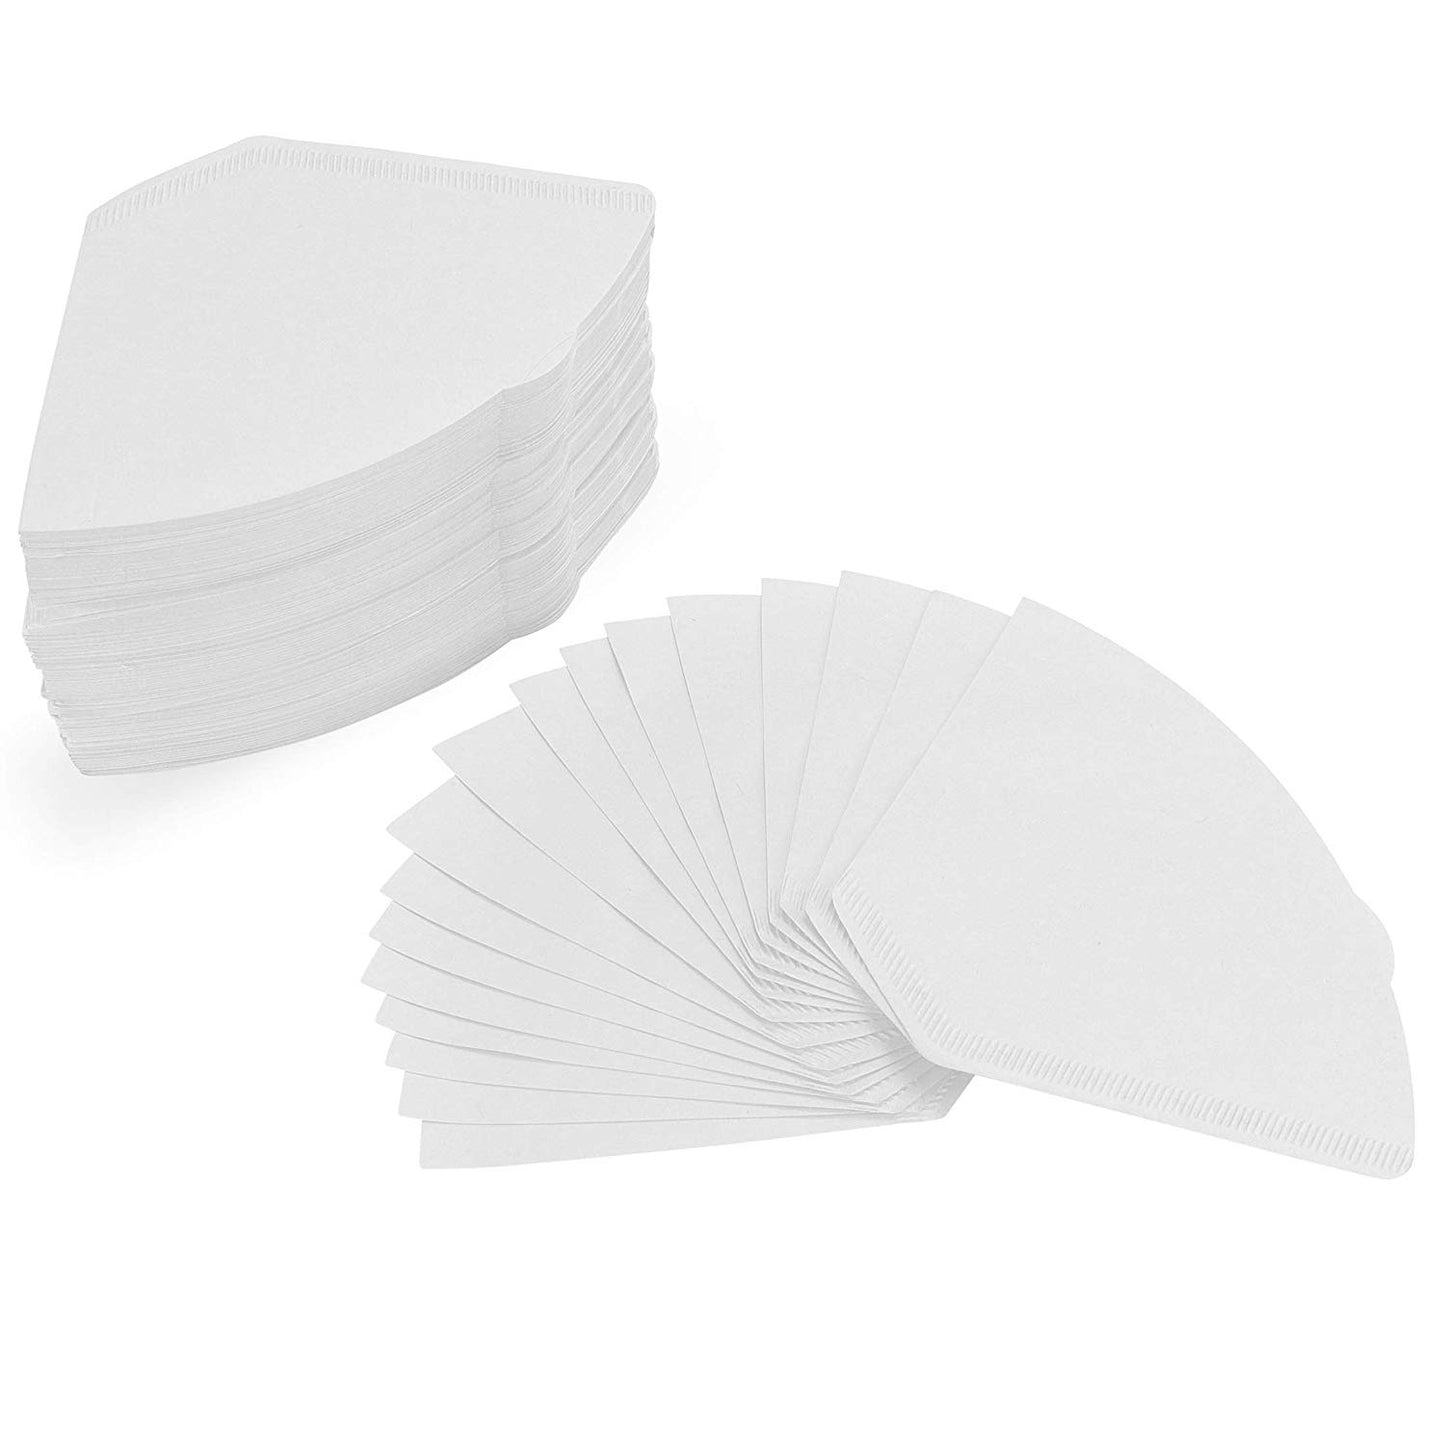 #4 Paper Filters (40 pack)